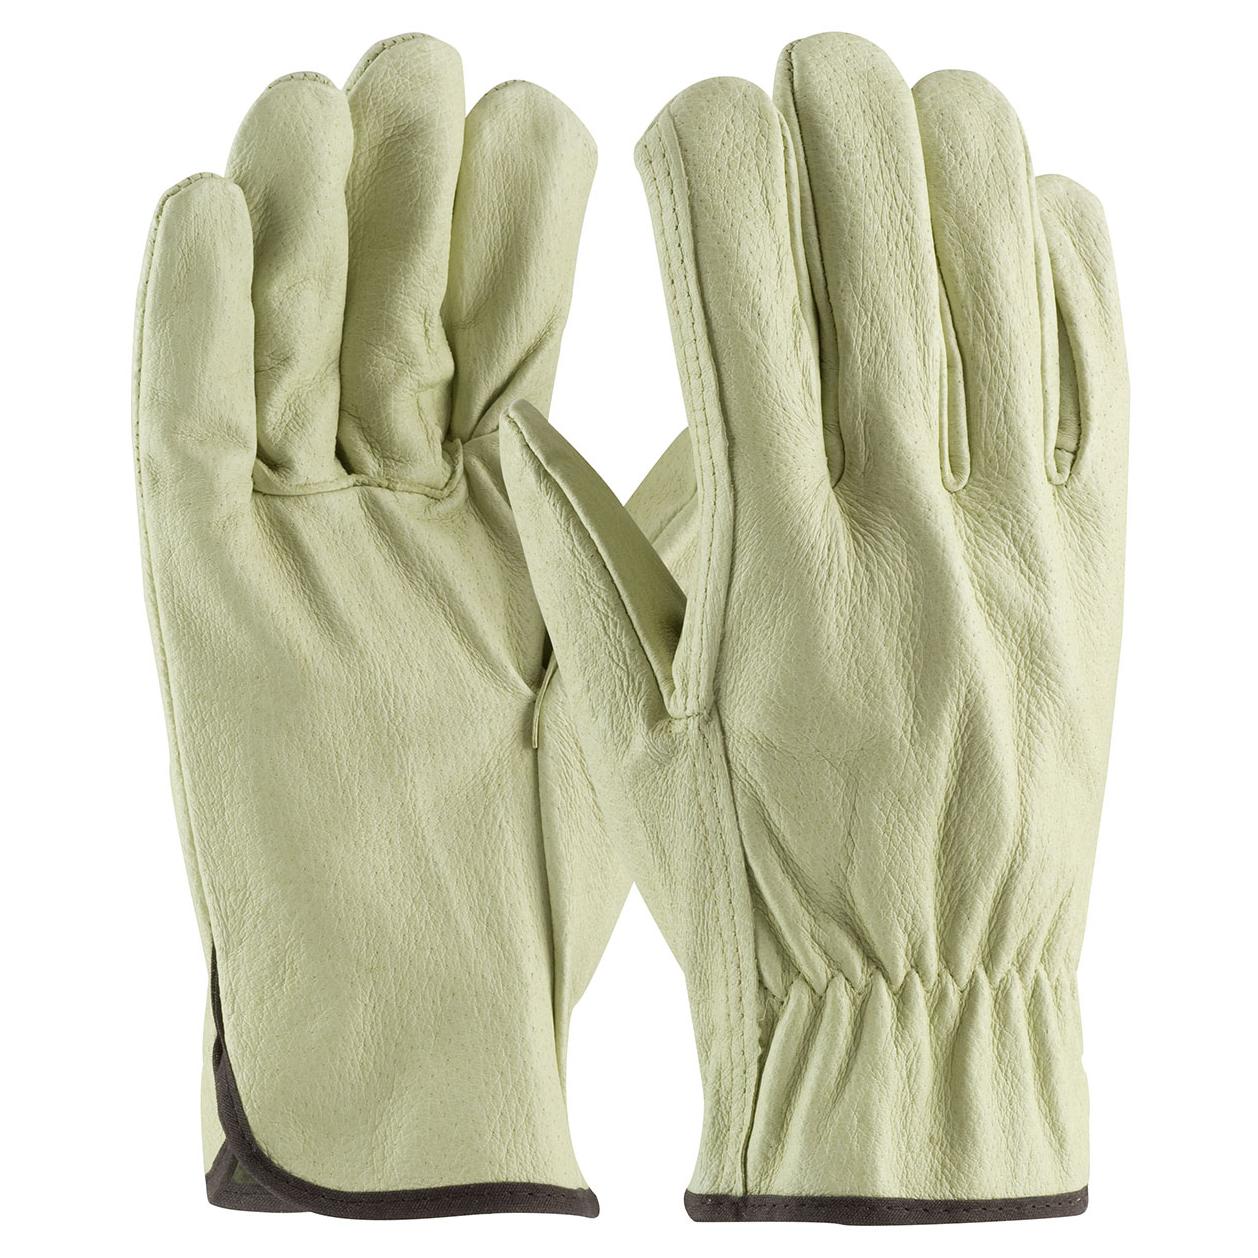 PIP® 70-301 Economy Grade General Purpose Gloves, Drivers, Top Grain Pigskin Leather Palm, Top Grain Pigskin Leather, Natural, Slip-On Cuff, Uncoated Coating, Resists: Moisture, Unlined Lining, Straight Thumb